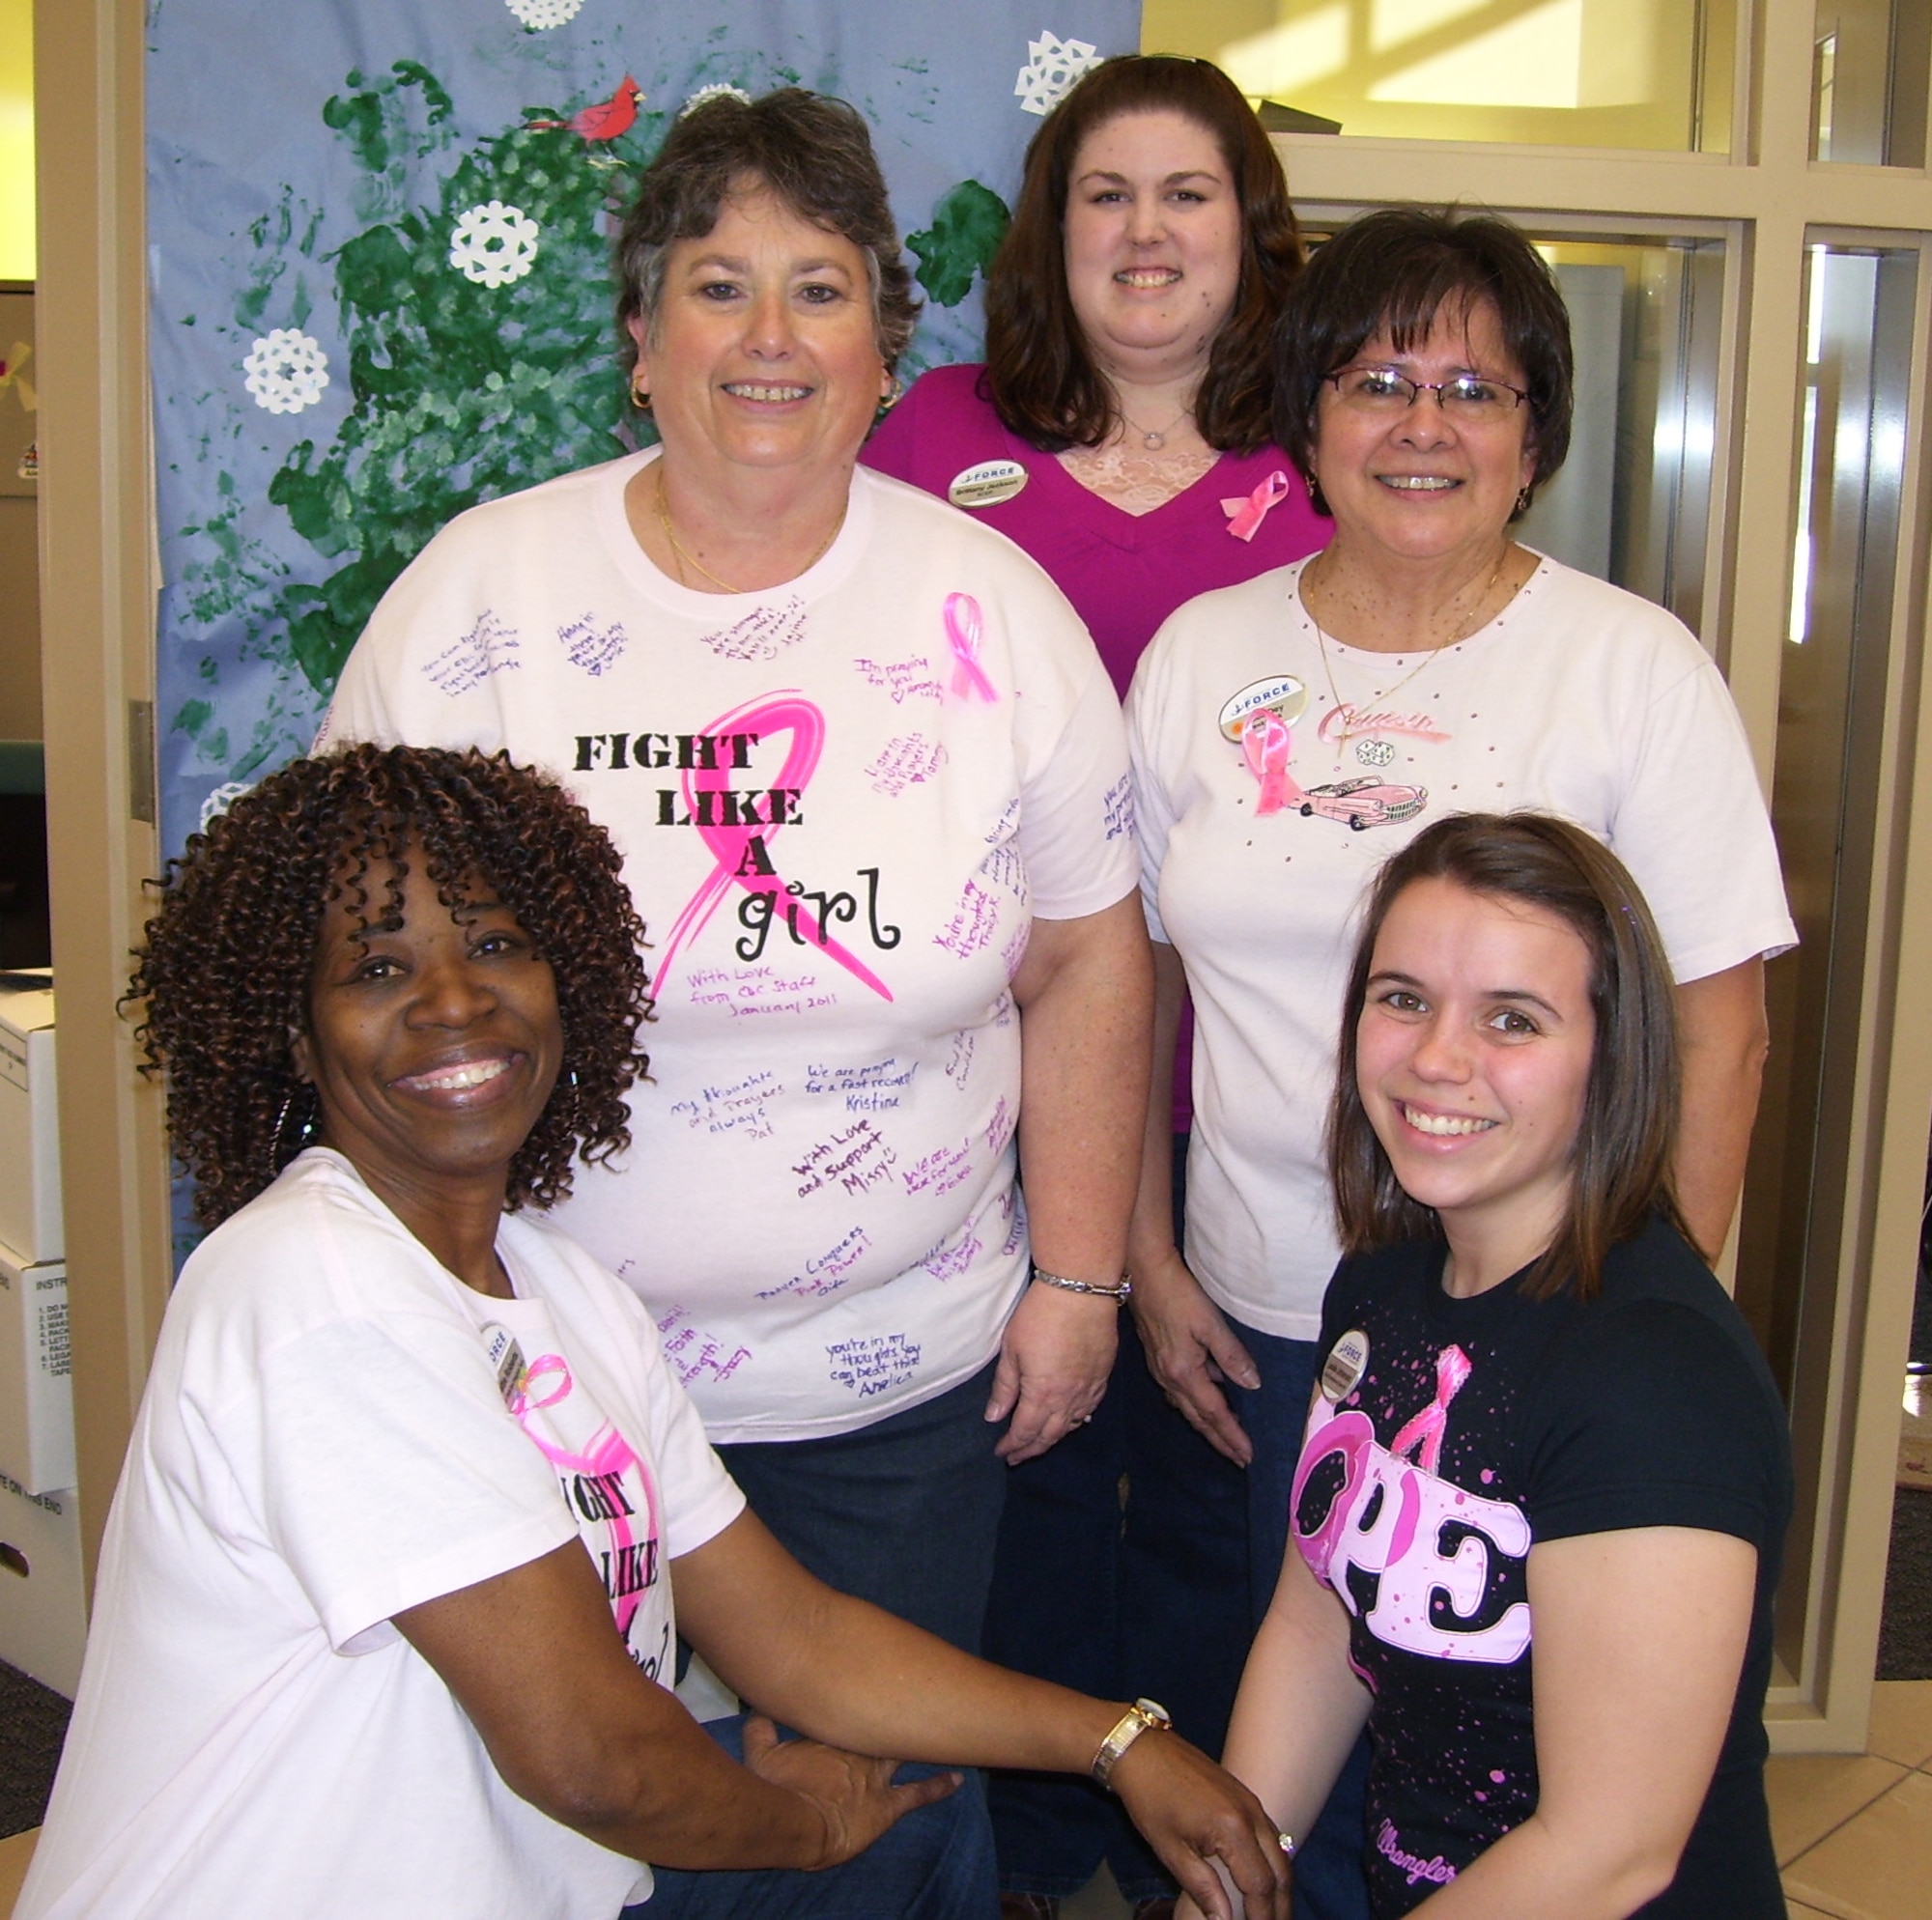 WHITEMAN AIR FORCE BASE, Mo. -- (Middle left) Julie Jolly, 509th Child Development Center director, with staff members, prior to the start of her radiation and chemotherapy. Staff members surprised Julie with a Breast Cancer Awareness pink T-shirt filled with prayers and supportive messages from other staff members. Front: Hattie Roberts, Leslie Johansen; Middle:  Julie Jolly, Aida Dey and back: Brittany Jackson